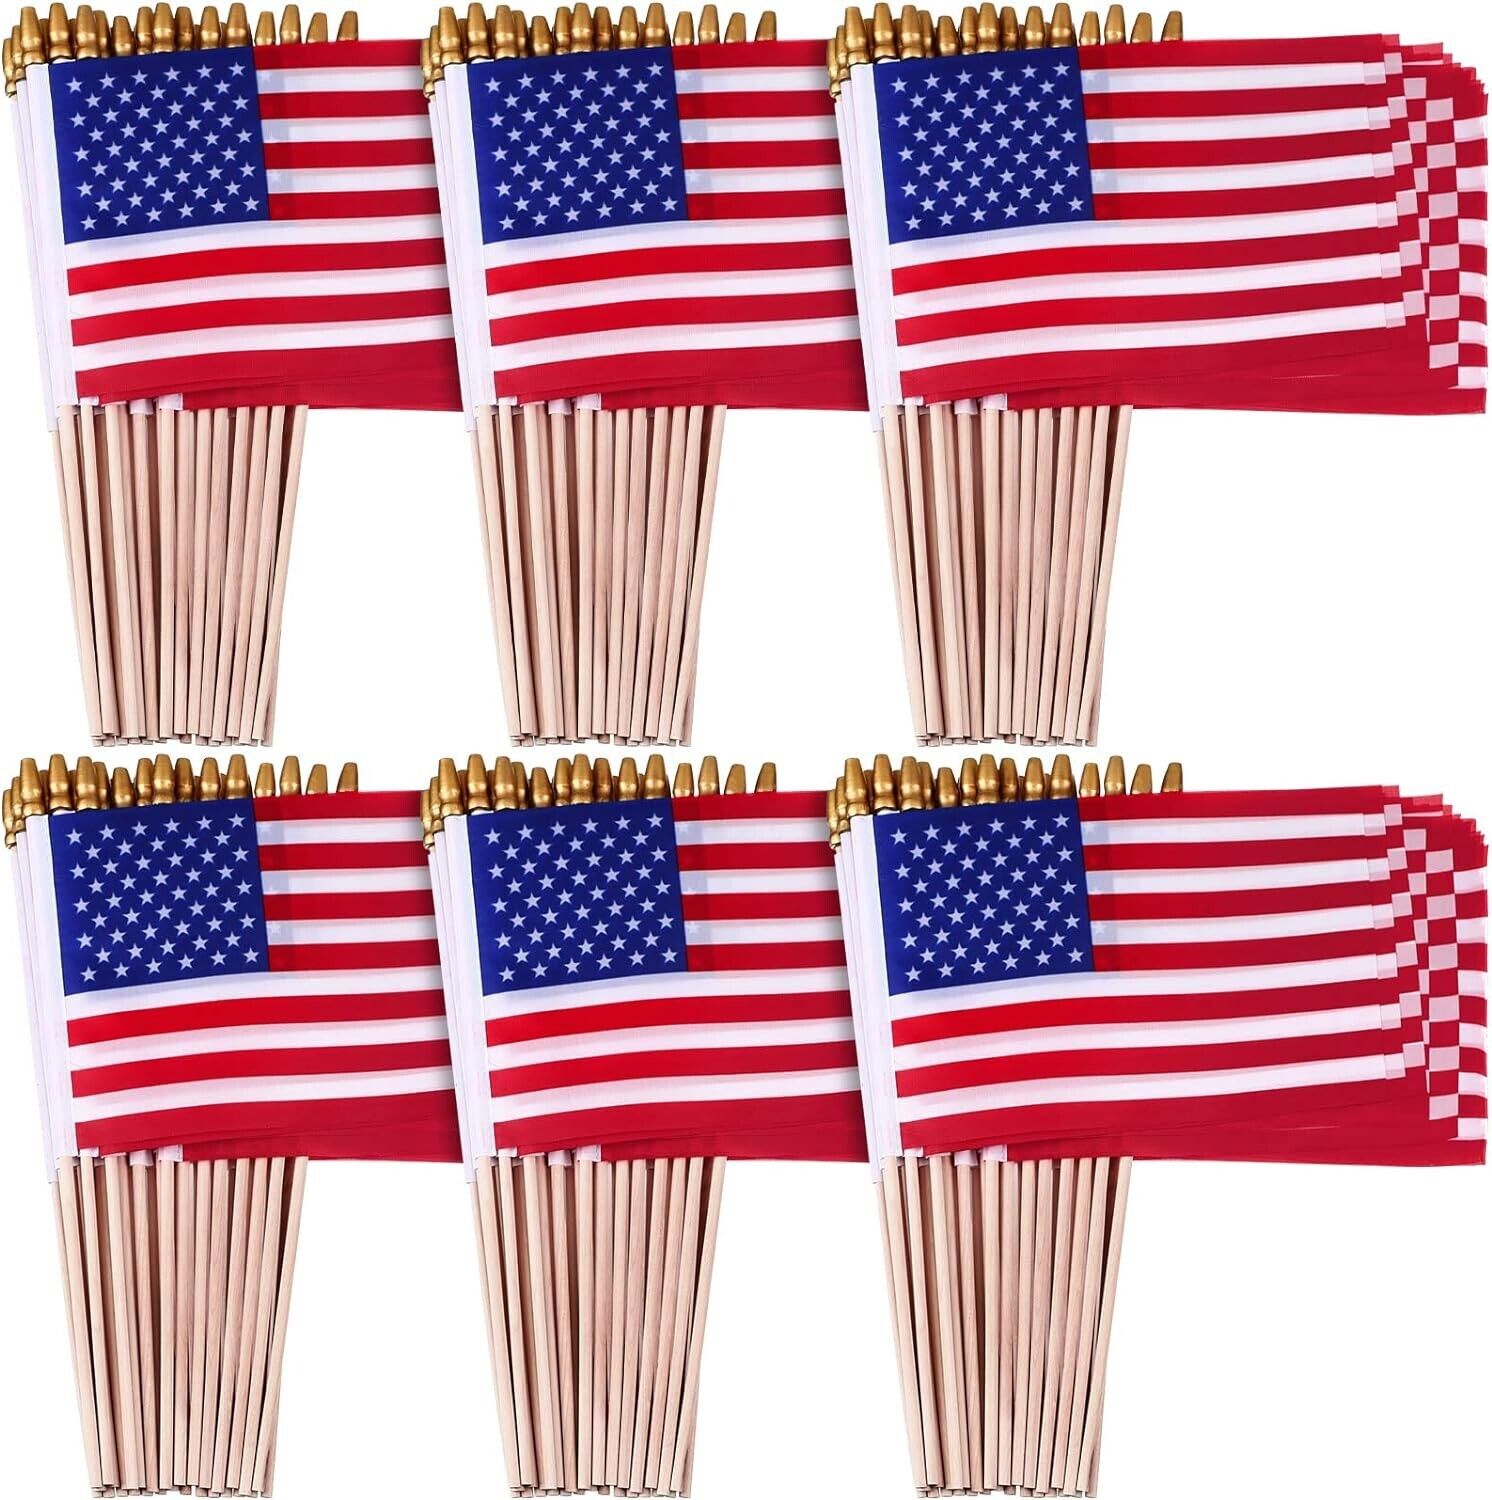 100 Packs of Small American Flags on Sticks, 8 x 12 Inches 4th of July